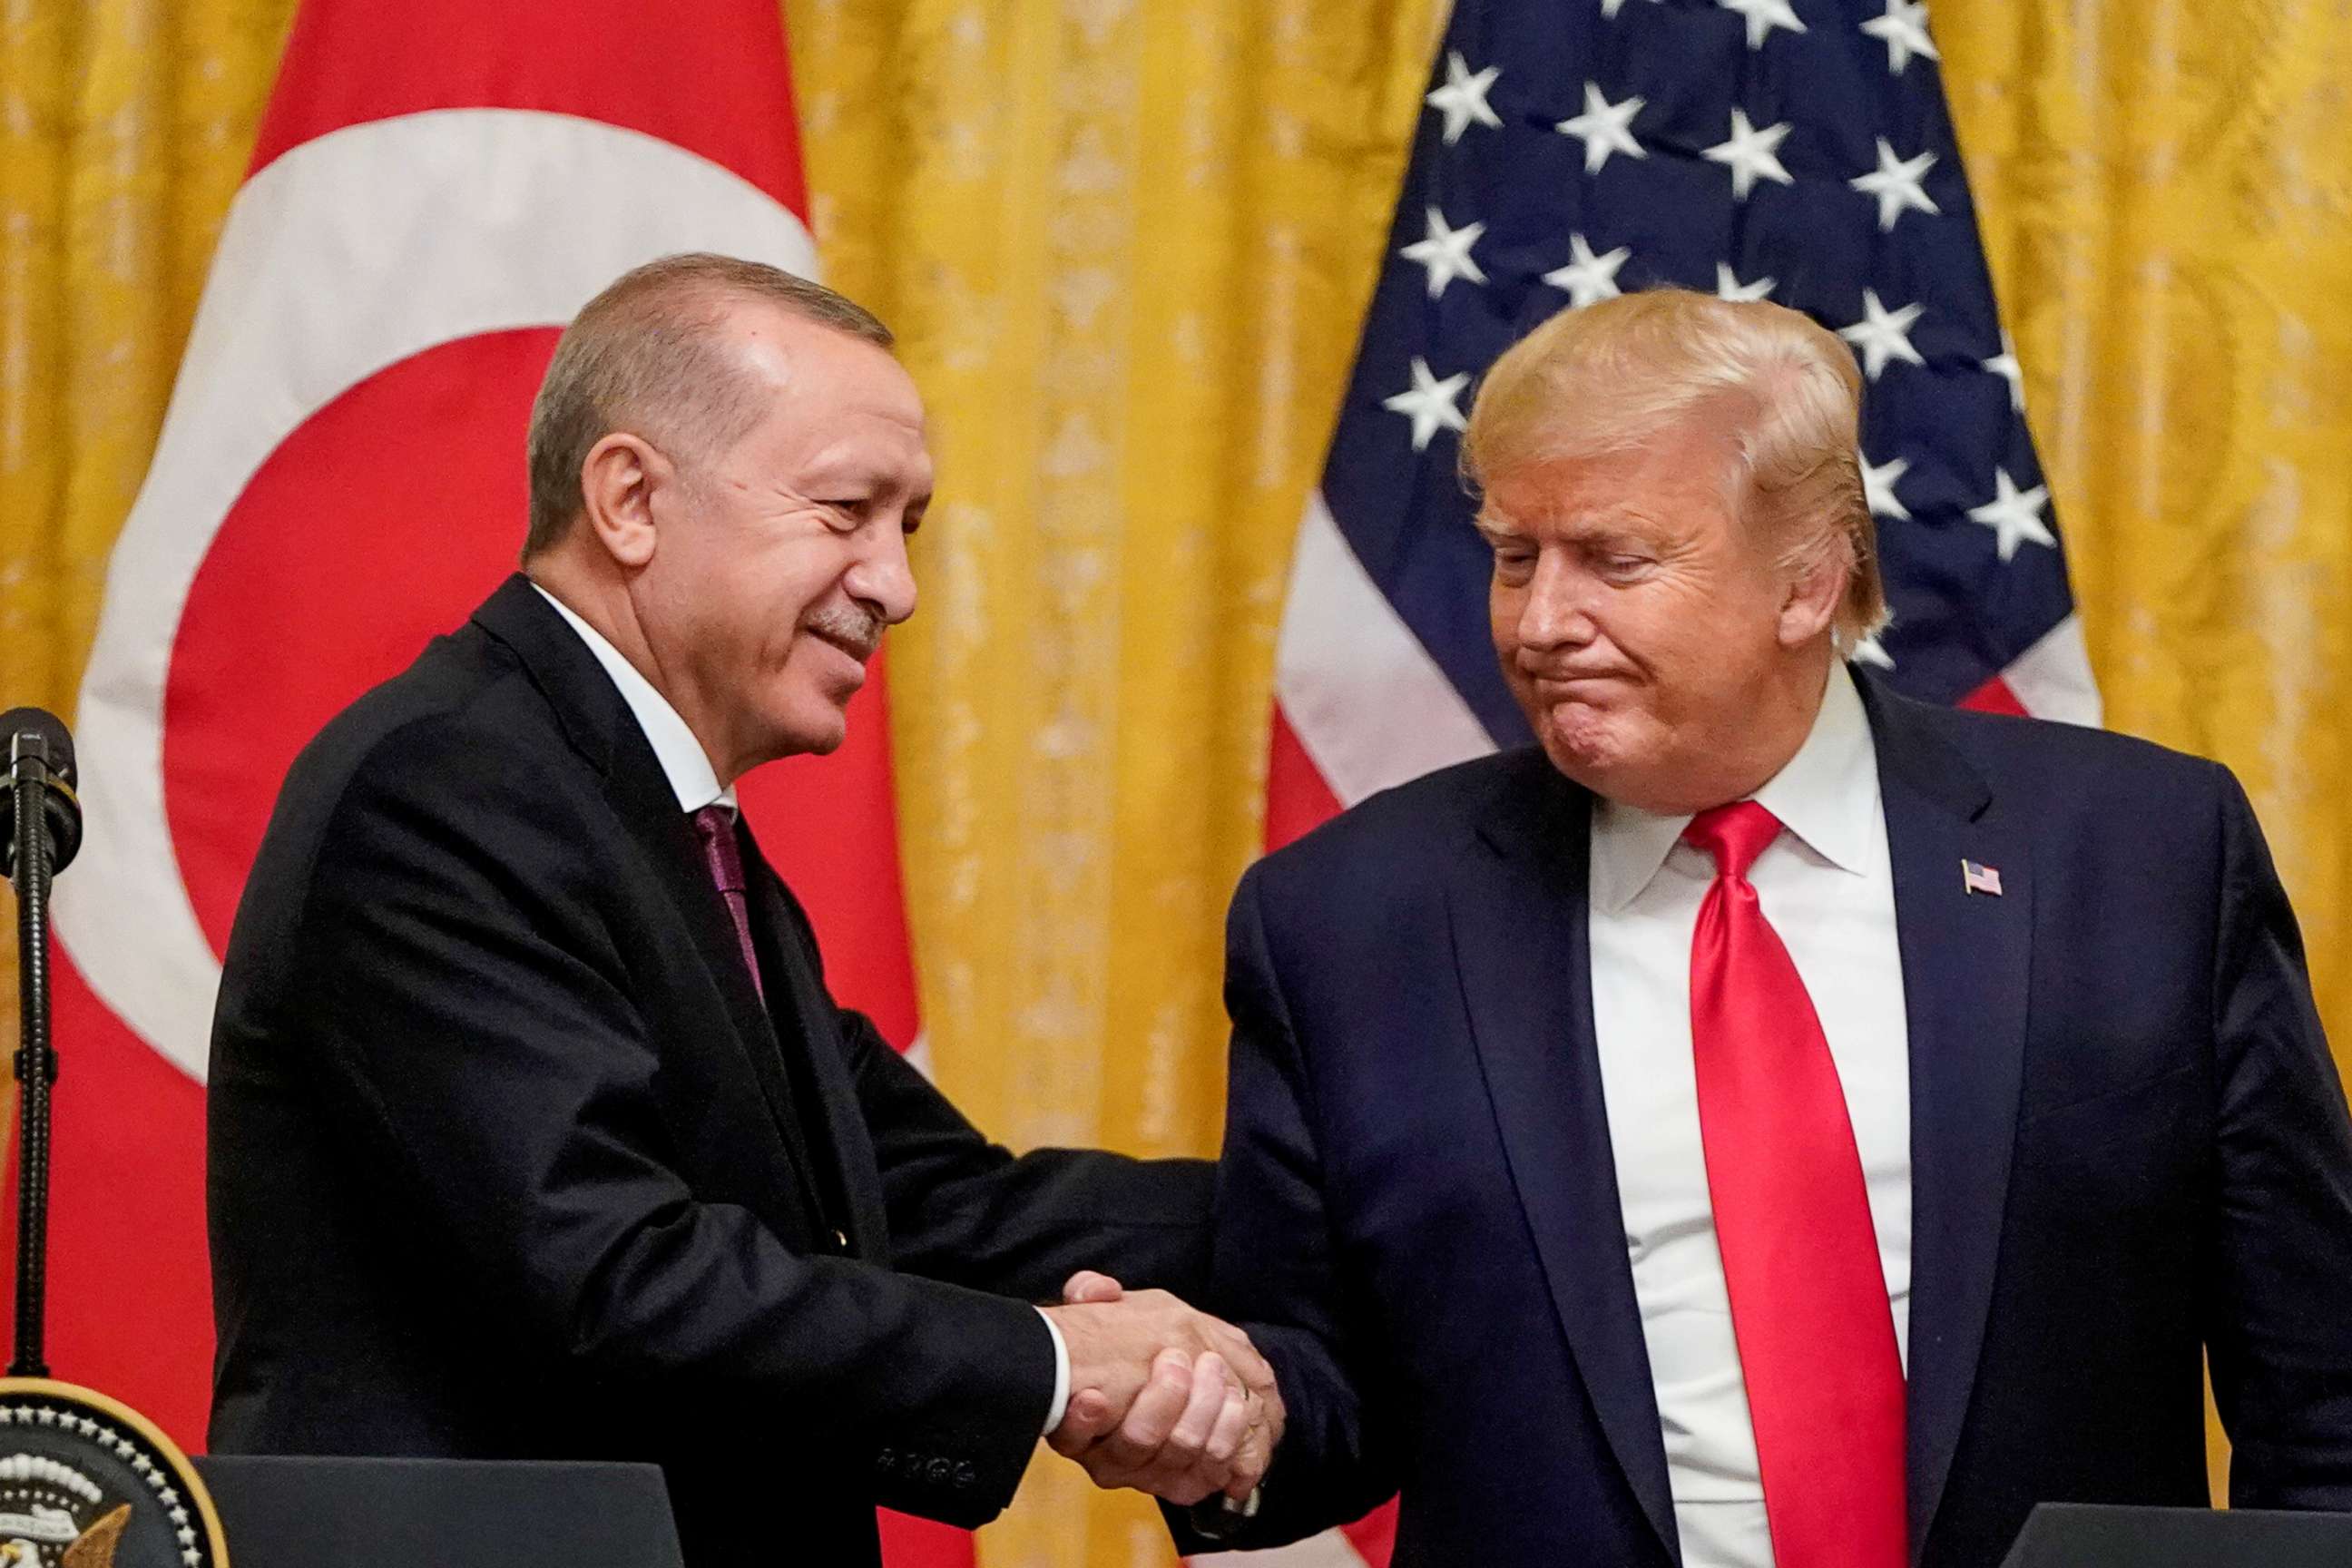 FILE PHOTO: U.S. President Donald Trump greets Turkey's President Tayyip Erdogan during a joint news conference at the White House in Washington, U.S., November 13, 2019. REUTERS/Joshua Roberts/File Photo